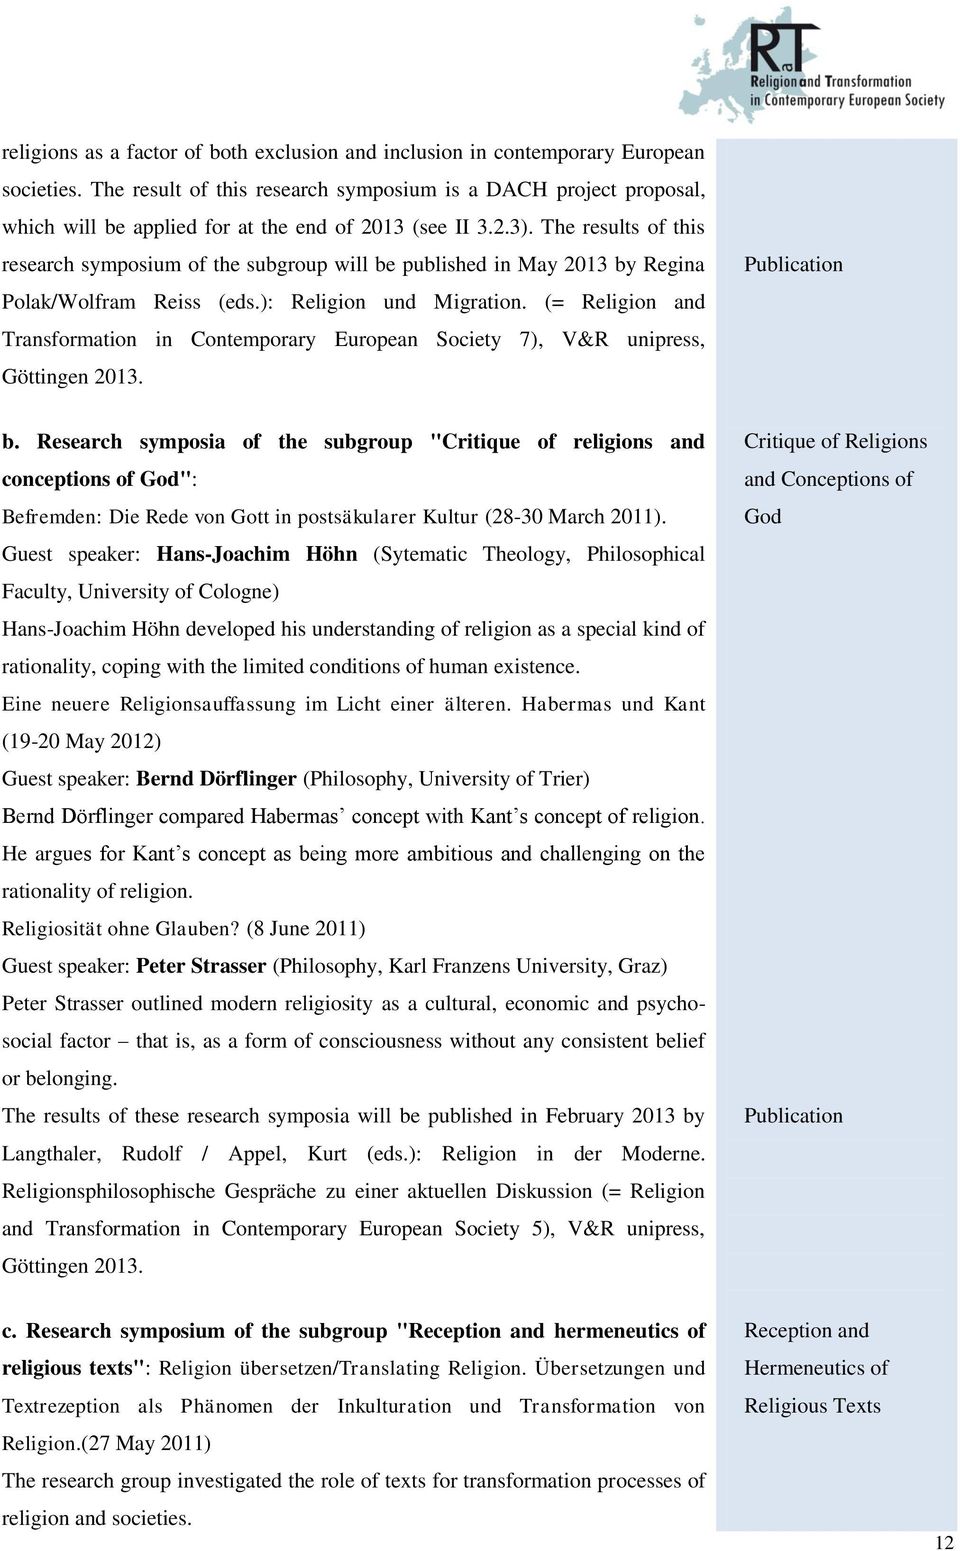 The results of this research symposium of the subgroup will be published in May 2013 by Regina Polak/Wolfram Reiss (eds.): Religion und Migration.